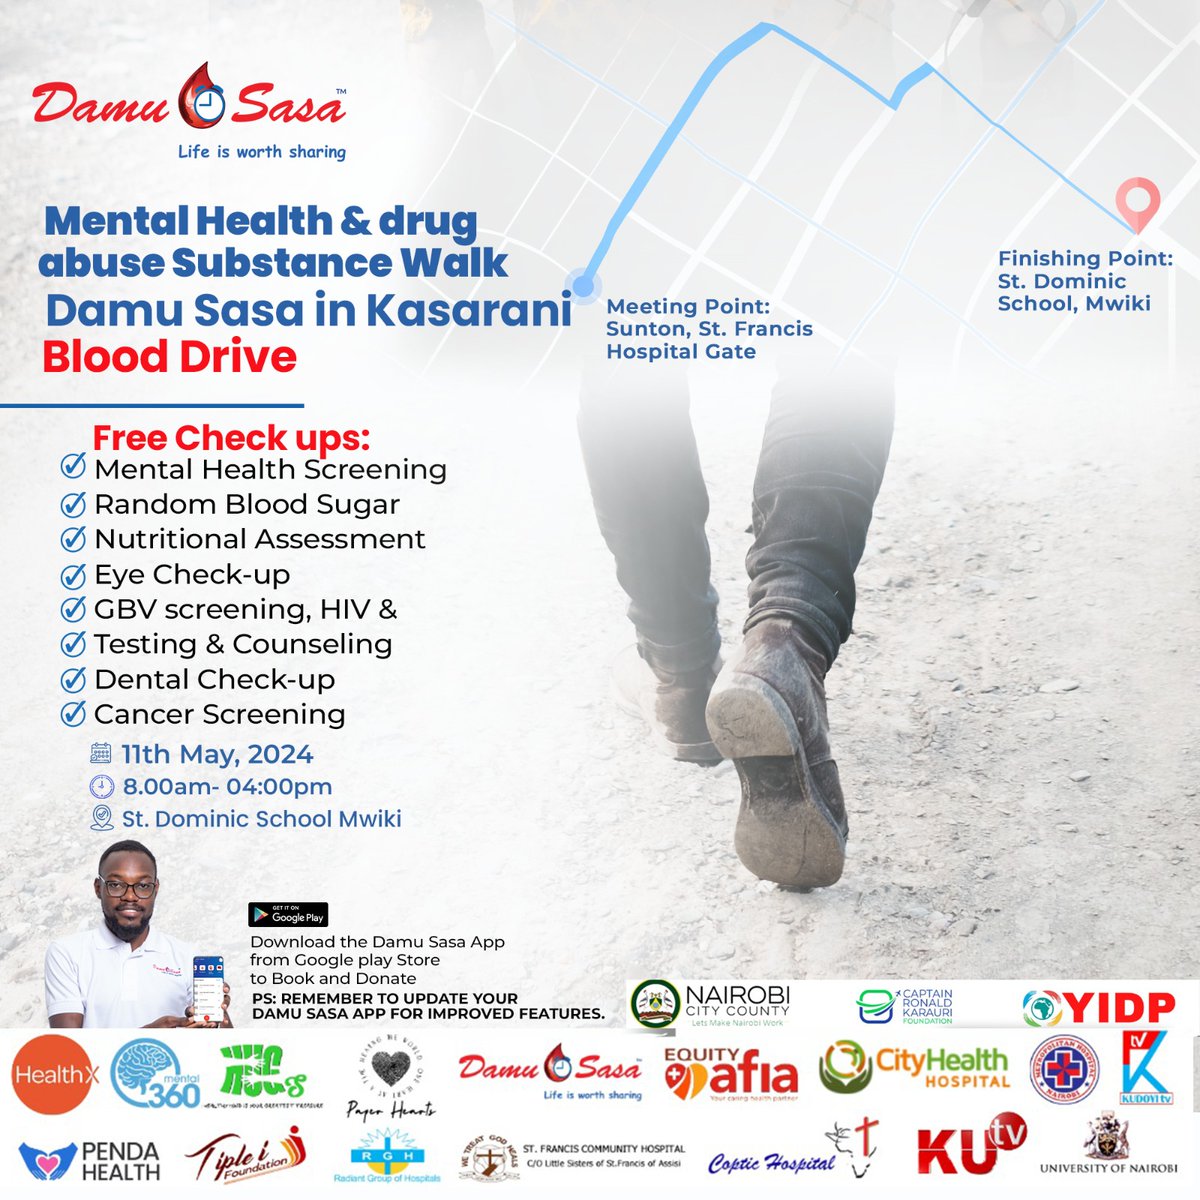 Damu Sasa will be in Kasarani for the Mental Health & Drug Abuse Substance Walk.Don't miss our Blood Drive and the complementary health services! #damusasa #kasaraniedition #blooddrive #MentalhealthanddrugabuseWalk